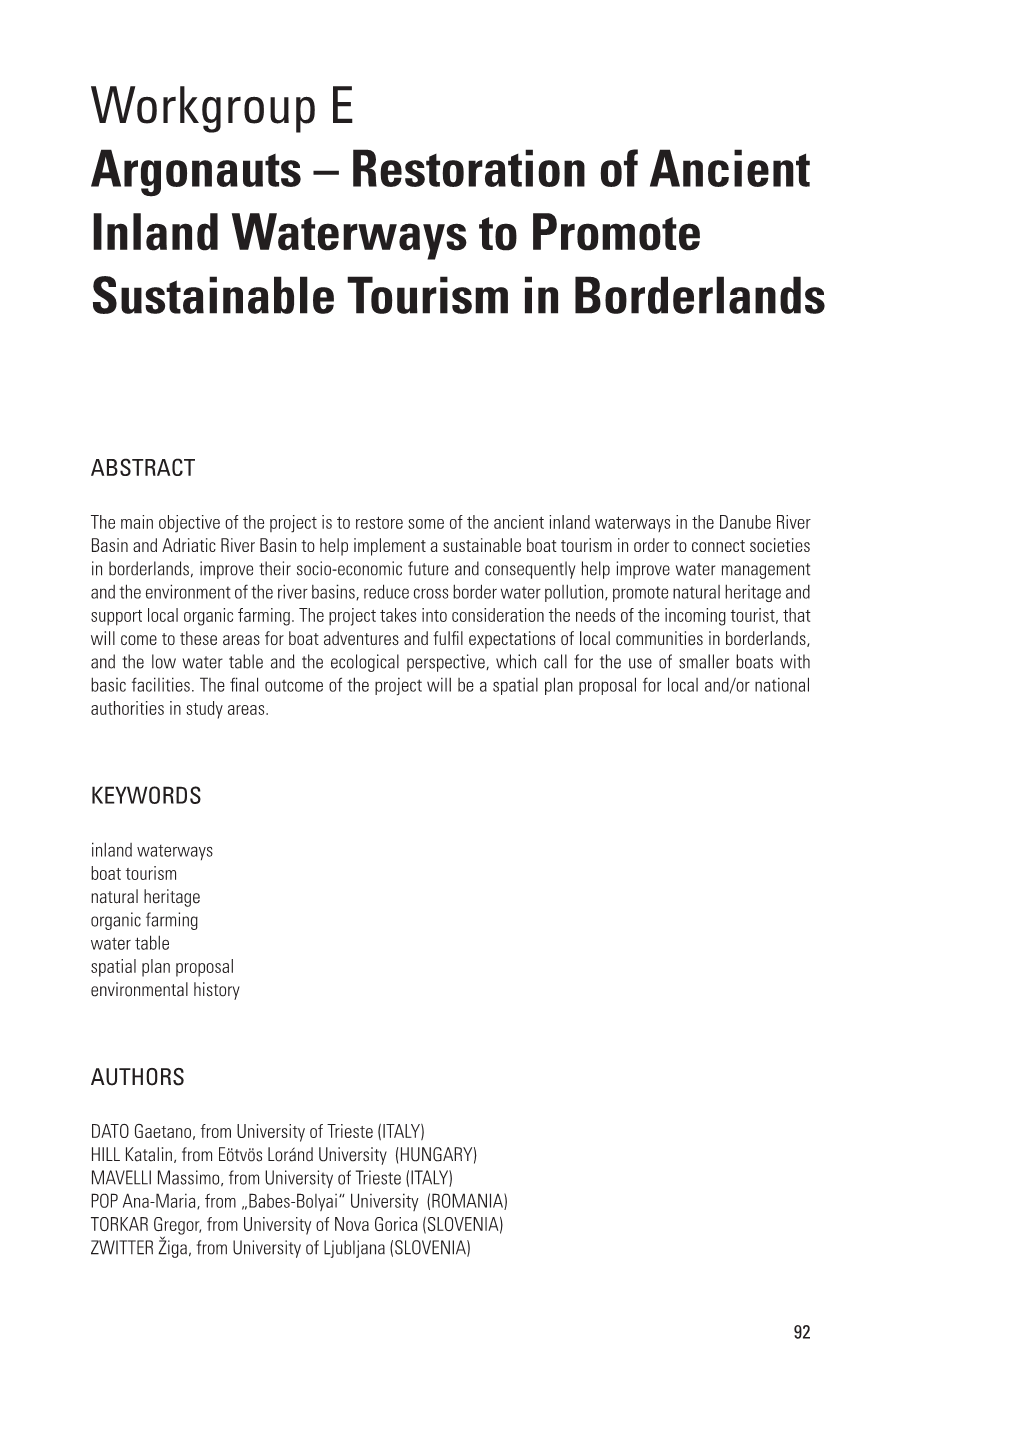 Restoration of Ancient Inland Waterways to Promote Sustainable Tourism in Borderlands